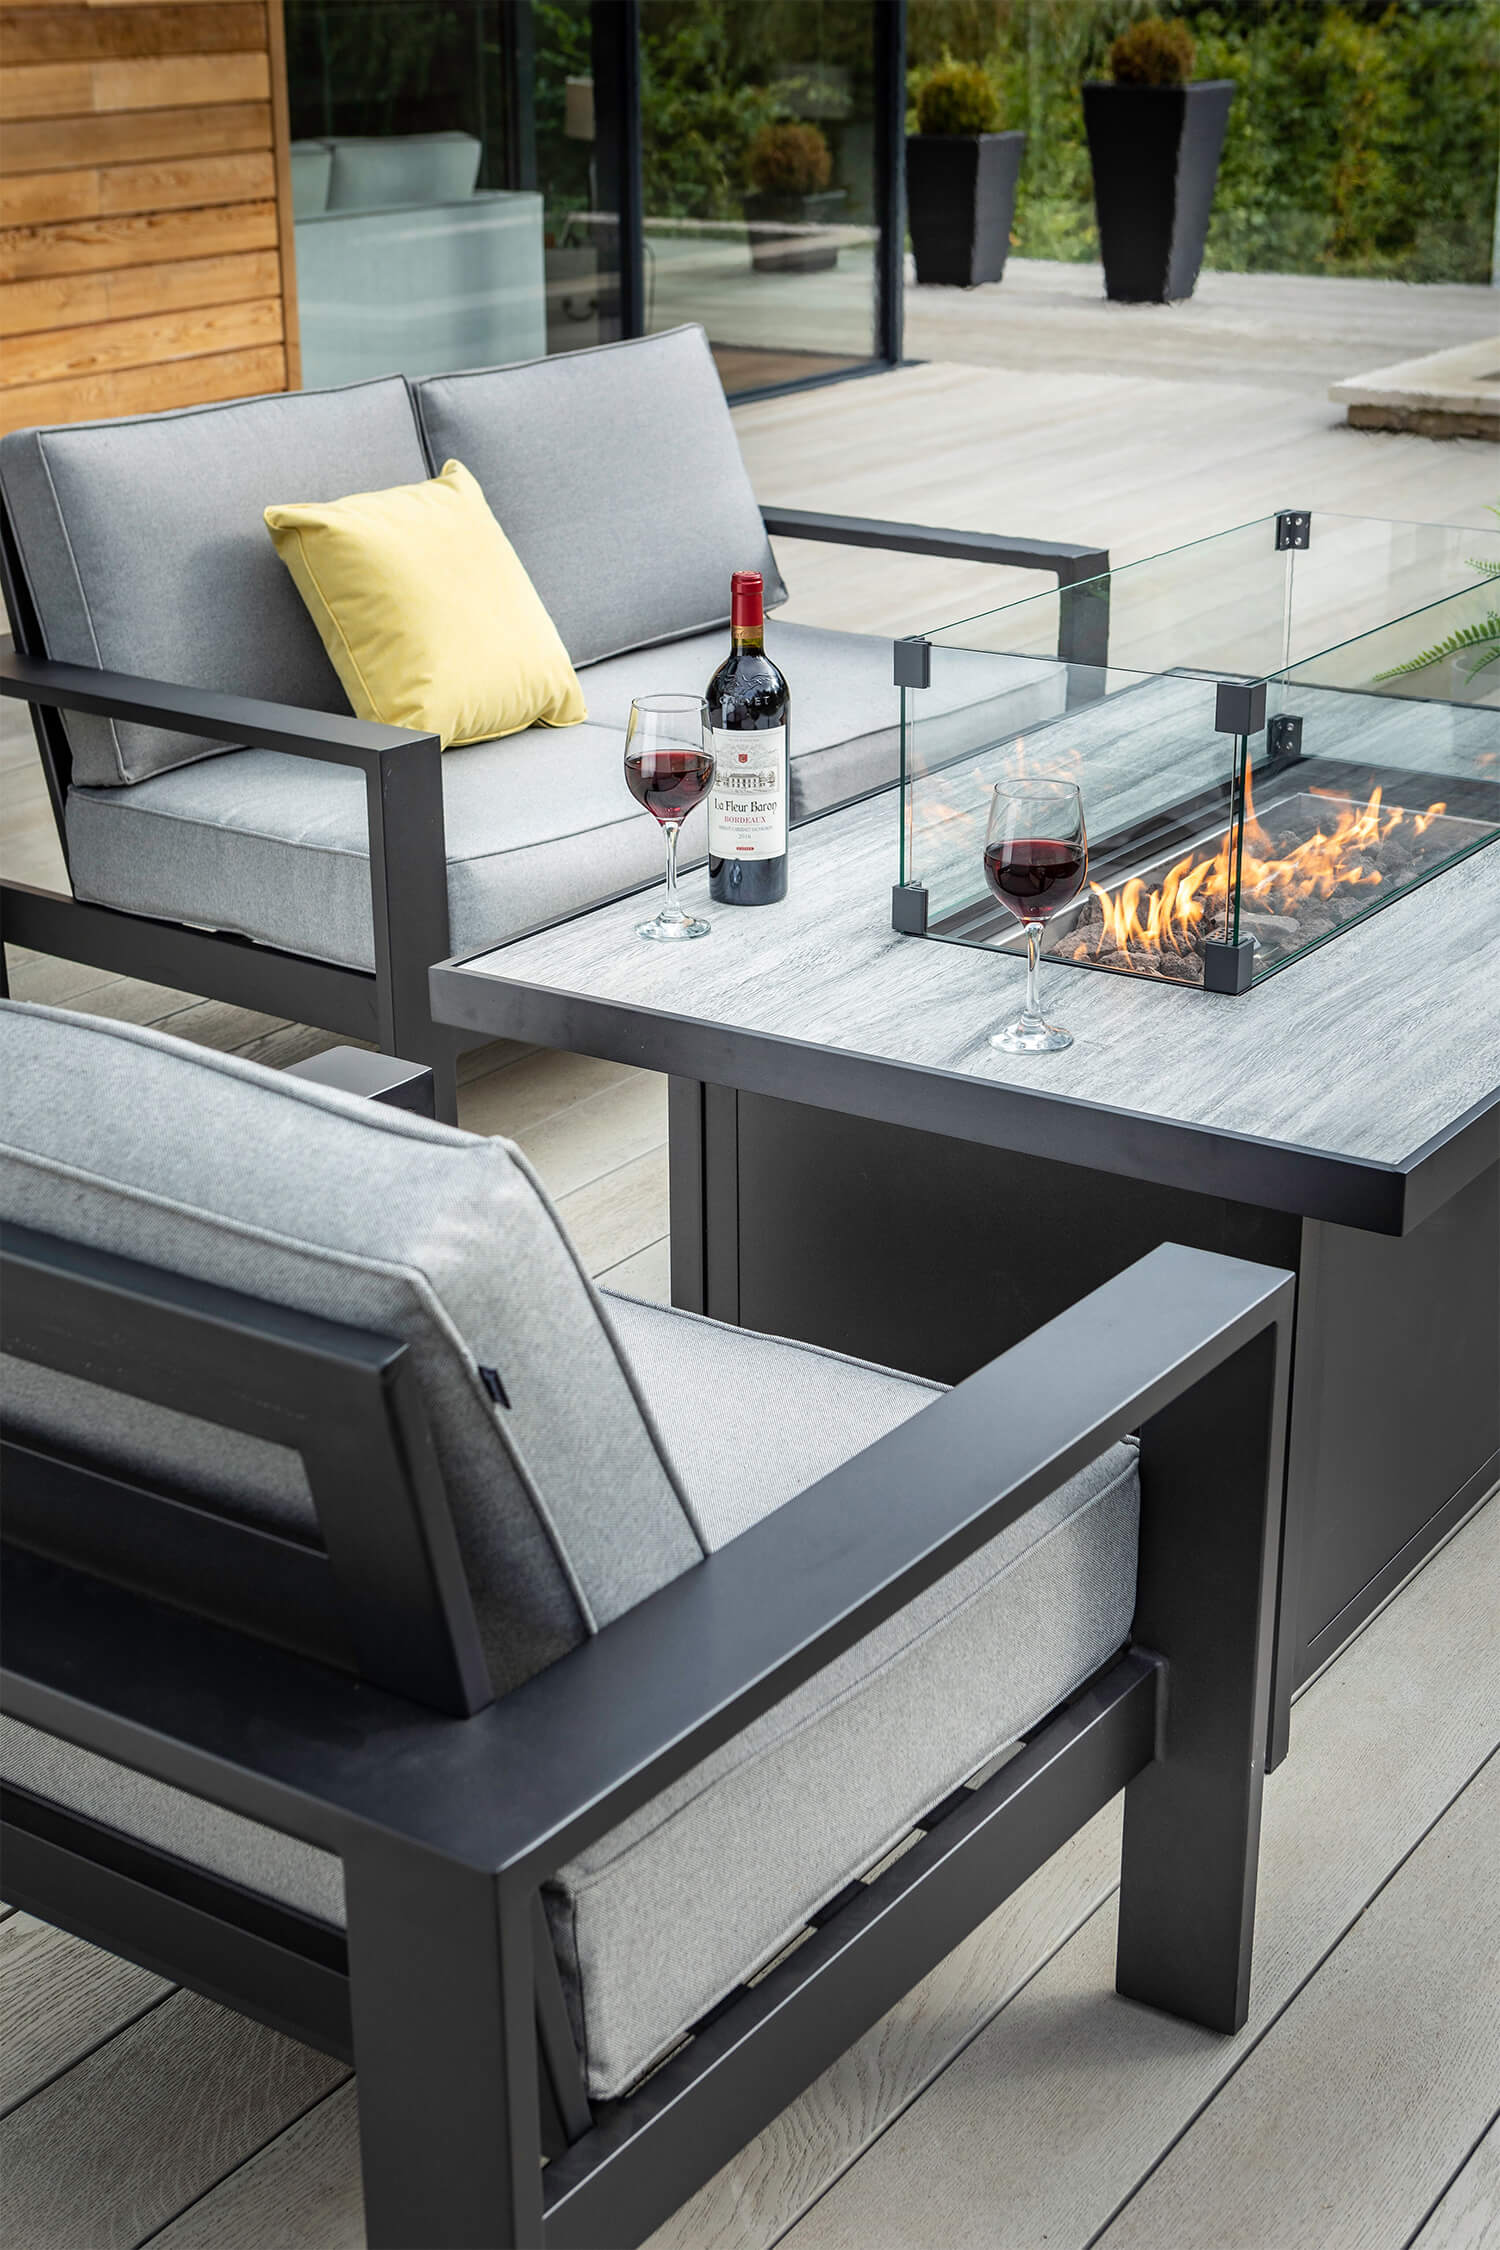 Hartman Atlas 2 Seater Sofa Lounge Set, Outdoor Furniture With Gas Fire Table